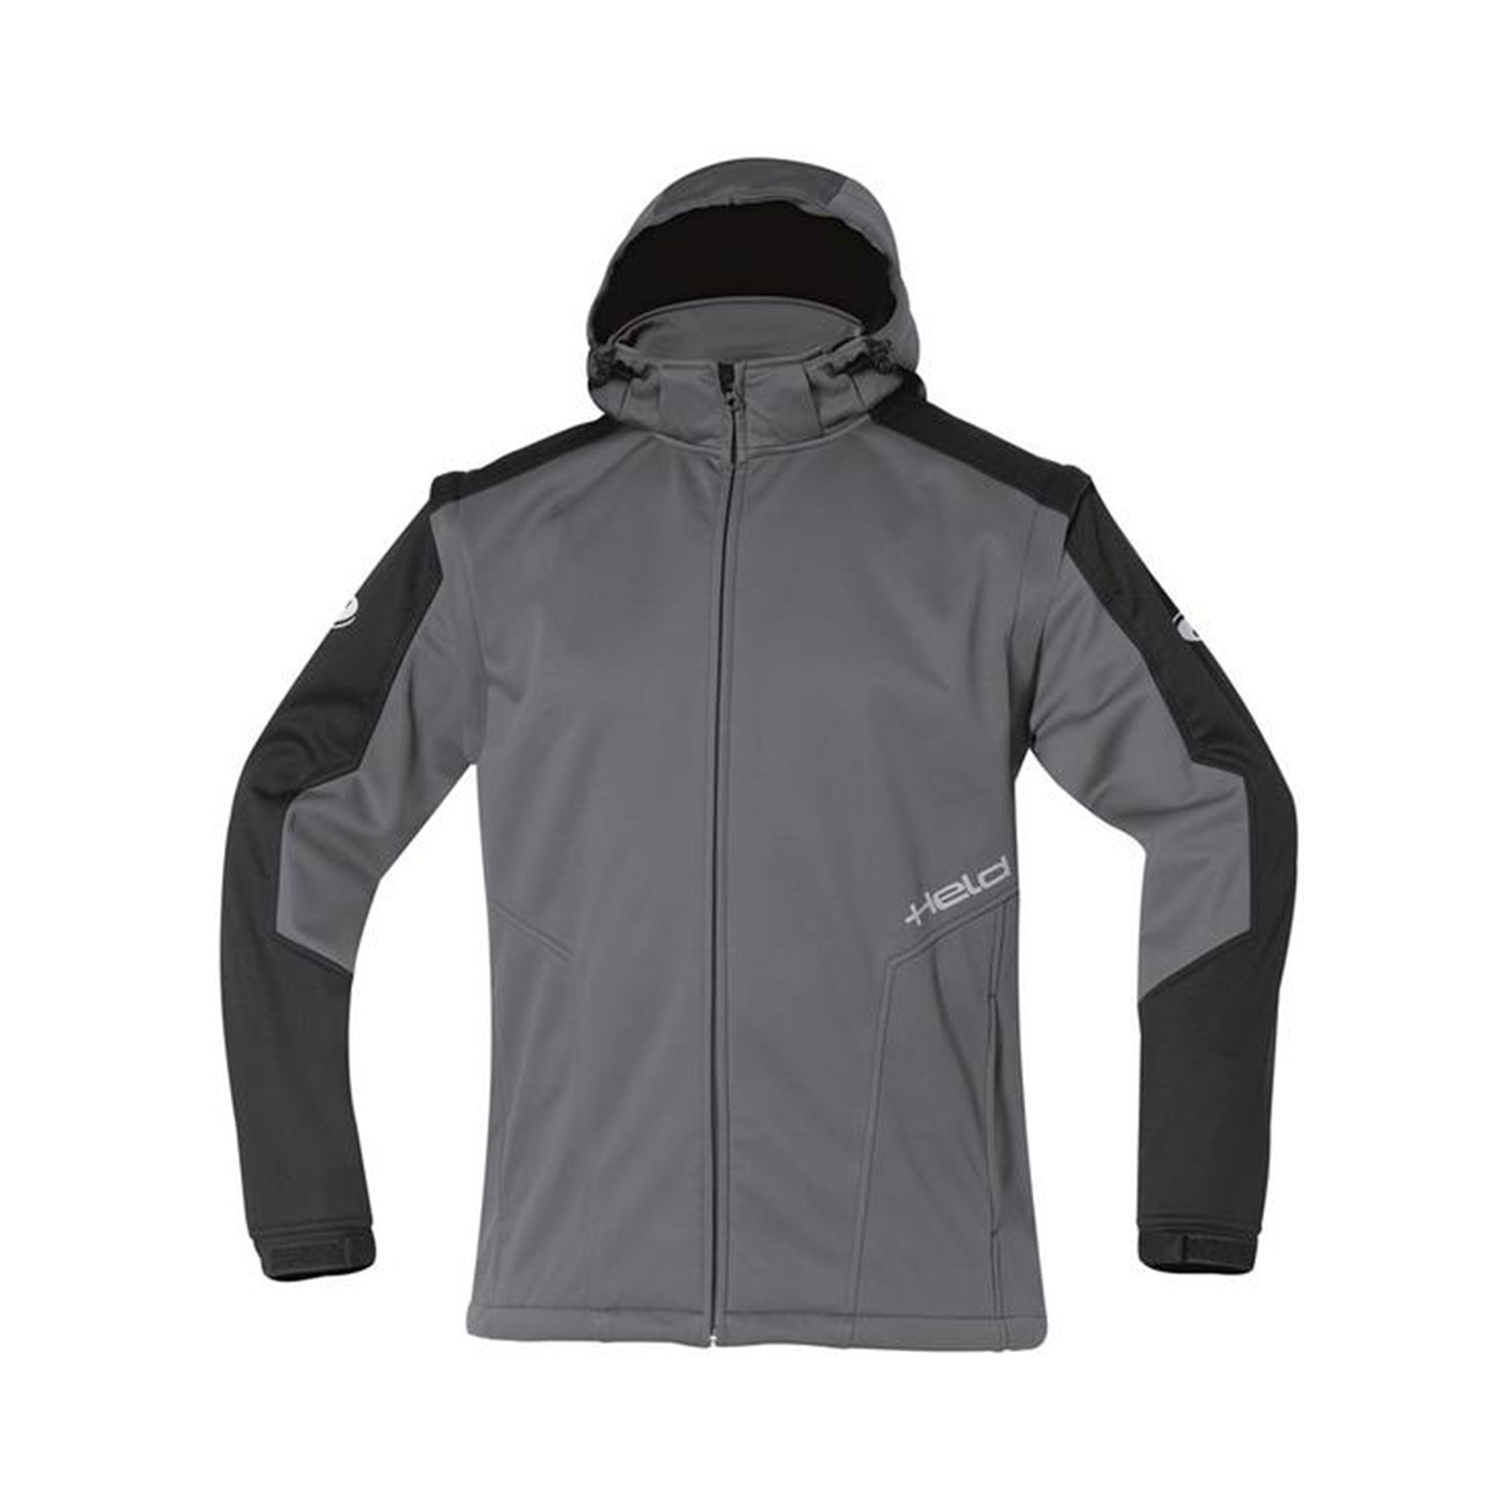 Held Softshell Jacket - Available in Various Sizes